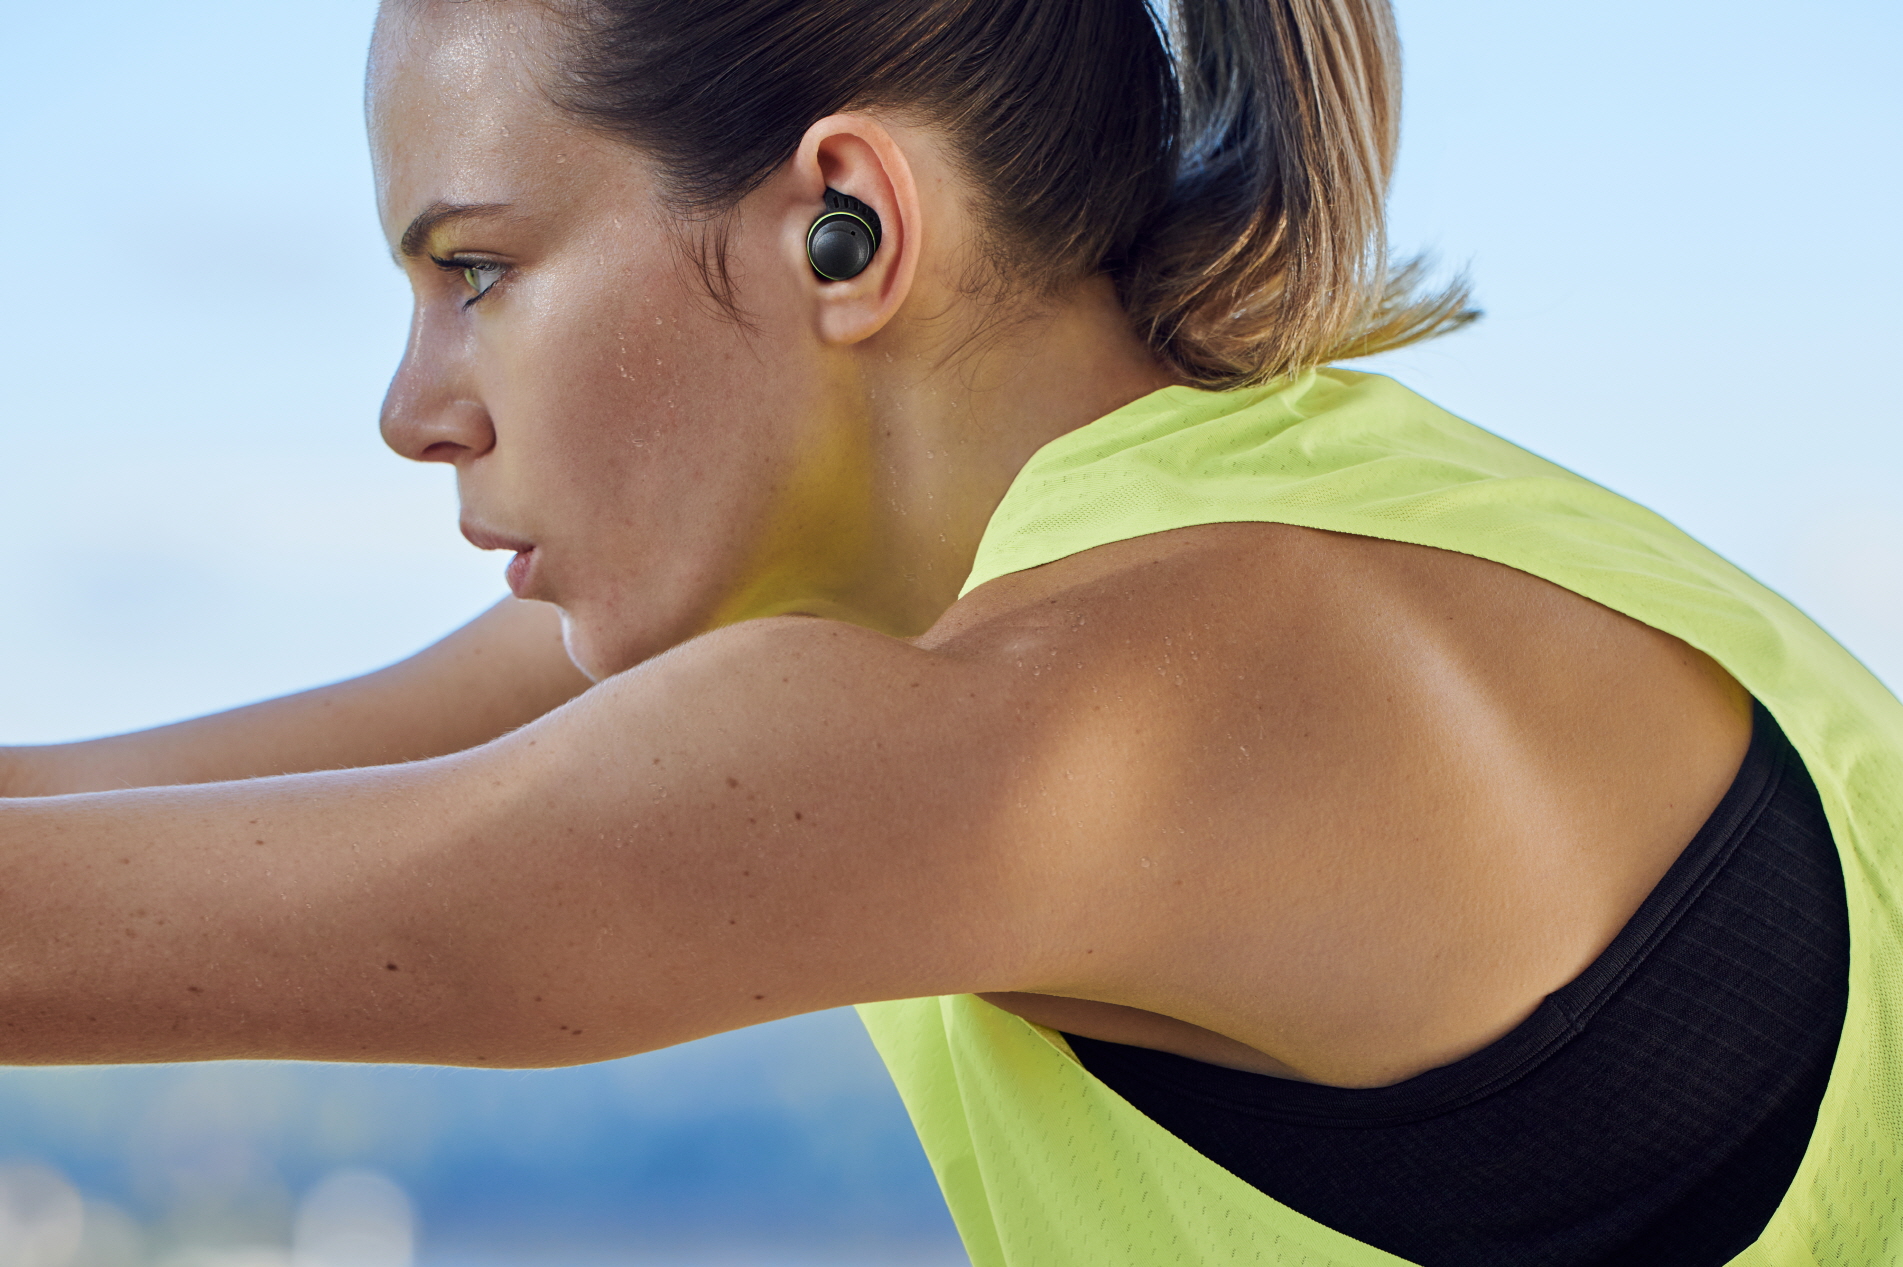 A woman working out while wearing the sweat-resistant LG TONE Free fit earbuds.